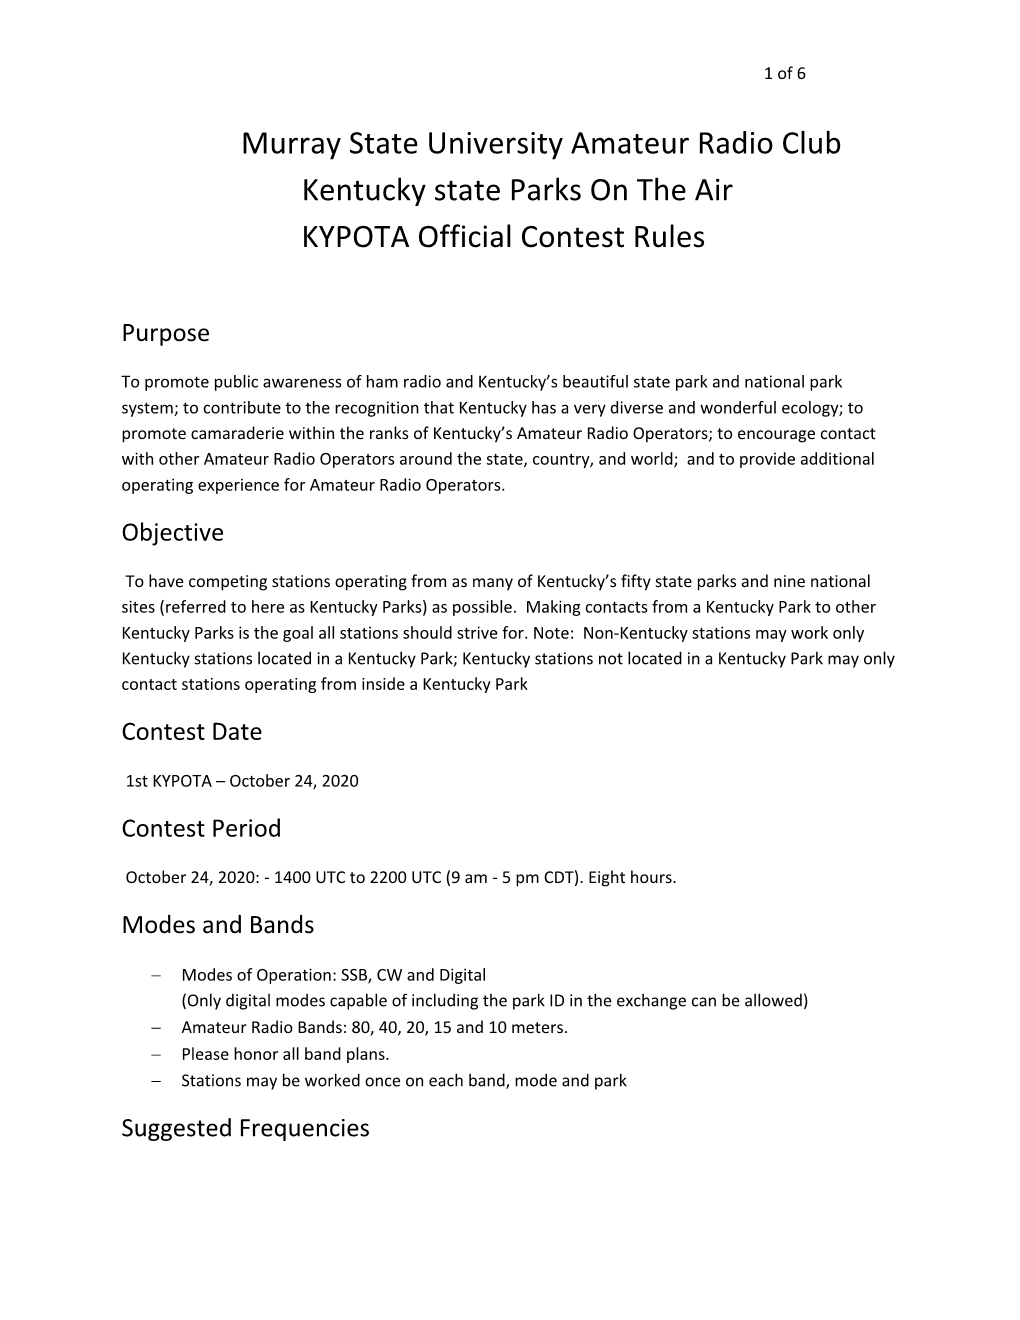 Murray State University Amateur Radio Club Kentucky State Parks on the Air KYPOTA Official Contest Rules